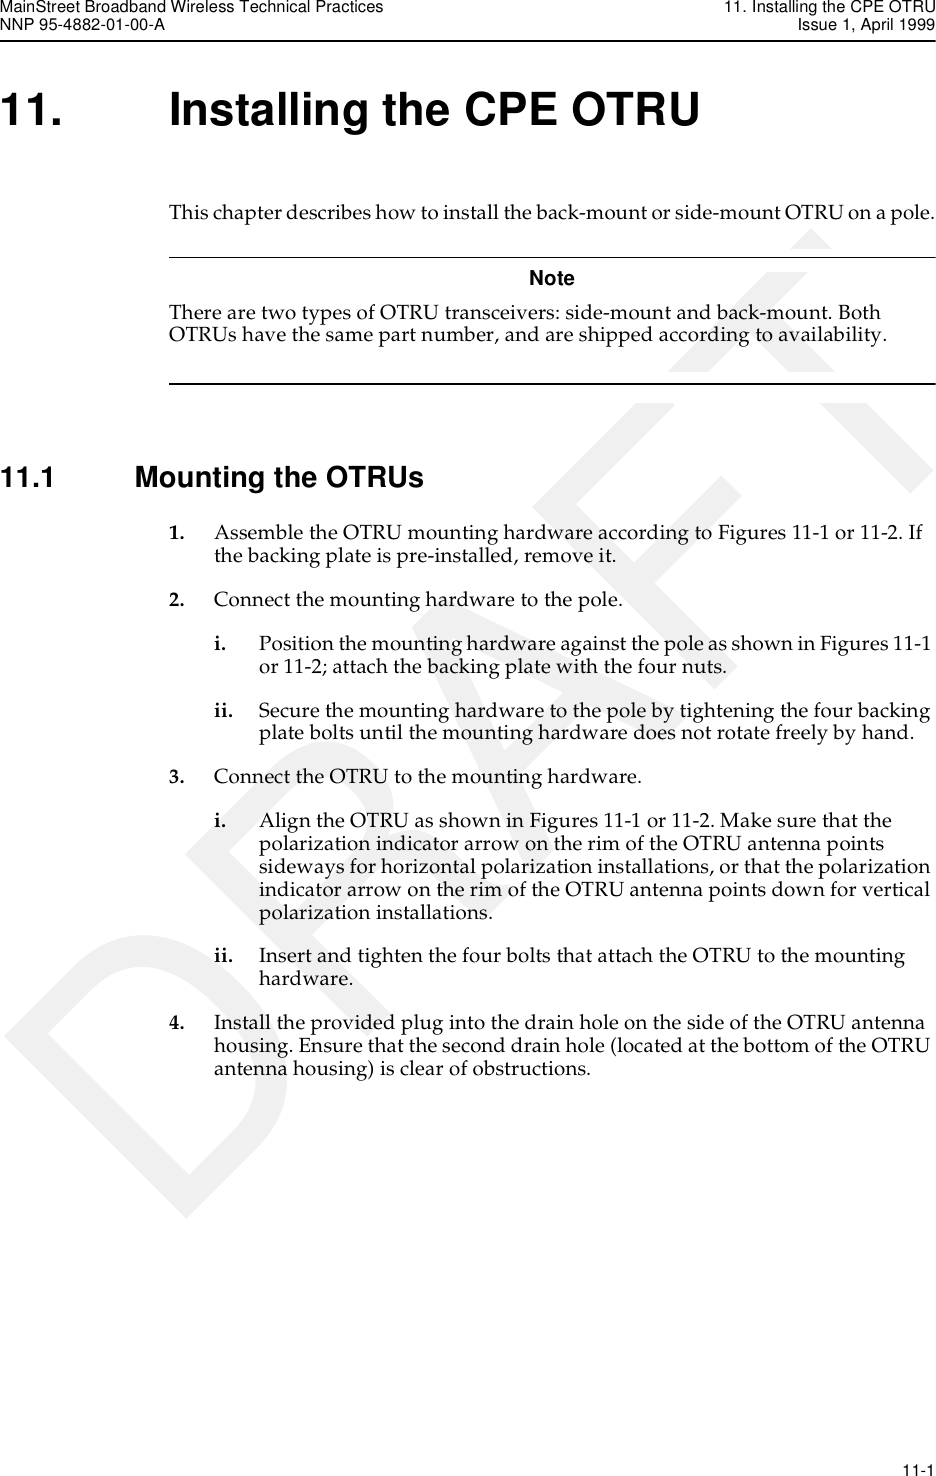 MainStreet Broadband Wireless Technical Practices 11. Installing the CPE OTRUNNP 95-4882-01-00-A Issue 1, April 1999   11-1DRAFT11. Installing the CPE OTRUThis chapter describes how to install the back-mount or side-mount OTRU on a pole.NoteThere are two types of OTRU transceivers: side-mount and back-mount. Both OTRUs have the same part number, and are shipped according to availability. 11.1 Mounting the OTRUs1. Assemble the OTRU mounting hardware according to Figures 11-1 or 11-2. If the backing plate is pre-installed, remove it.2. Connect the mounting hardware to the pole.i. Position the mounting hardware against the pole as shown in Figures 11-1 or 11-2; attach the backing plate with the four nuts.ii. Secure the mounting hardware to the pole by tightening the four backing plate bolts until the mounting hardware does not rotate freely by hand.3. Connect the OTRU to the mounting hardware. i. Align the OTRU as shown in Figures 11-1 or 11-2. Make sure that the polarization indicator arrow on the rim of the OTRU antenna points sideways for horizontal polarization installations, or that the polarization indicator arrow on the rim of the OTRU antenna points down for vertical polarization installations.ii. Insert and tighten the four bolts that attach the OTRU to the mounting hardware.4. Install the provided plug into the drain hole on the side of the OTRU antenna housing. Ensure that the second drain hole (located at the bottom of the OTRU antenna housing) is clear of obstructions.